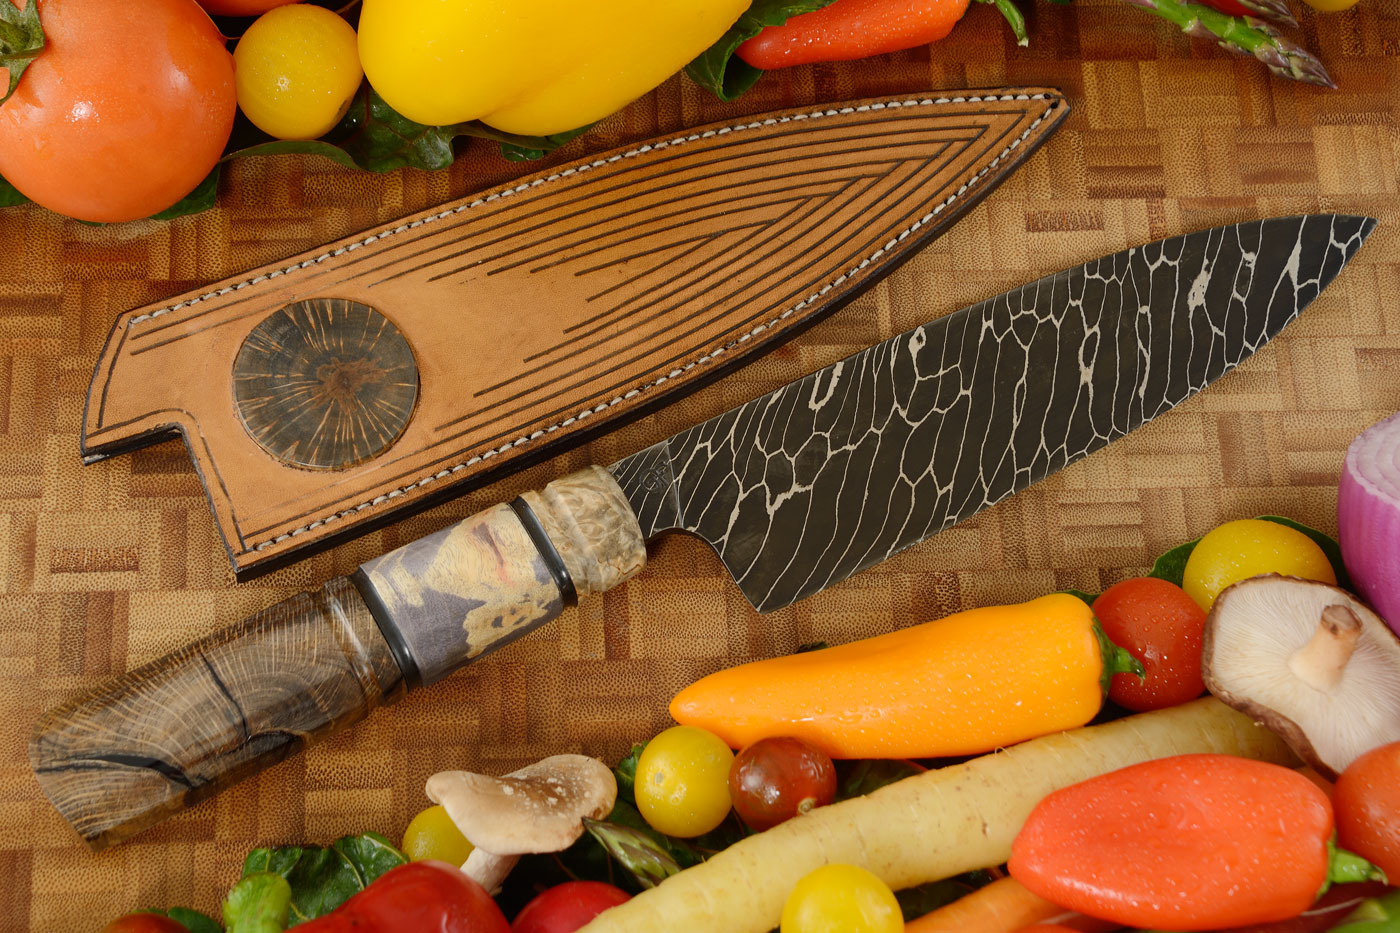 Damascus Chef Knife (7-3/4 in) with Birch, Mallee Burl, and Oak